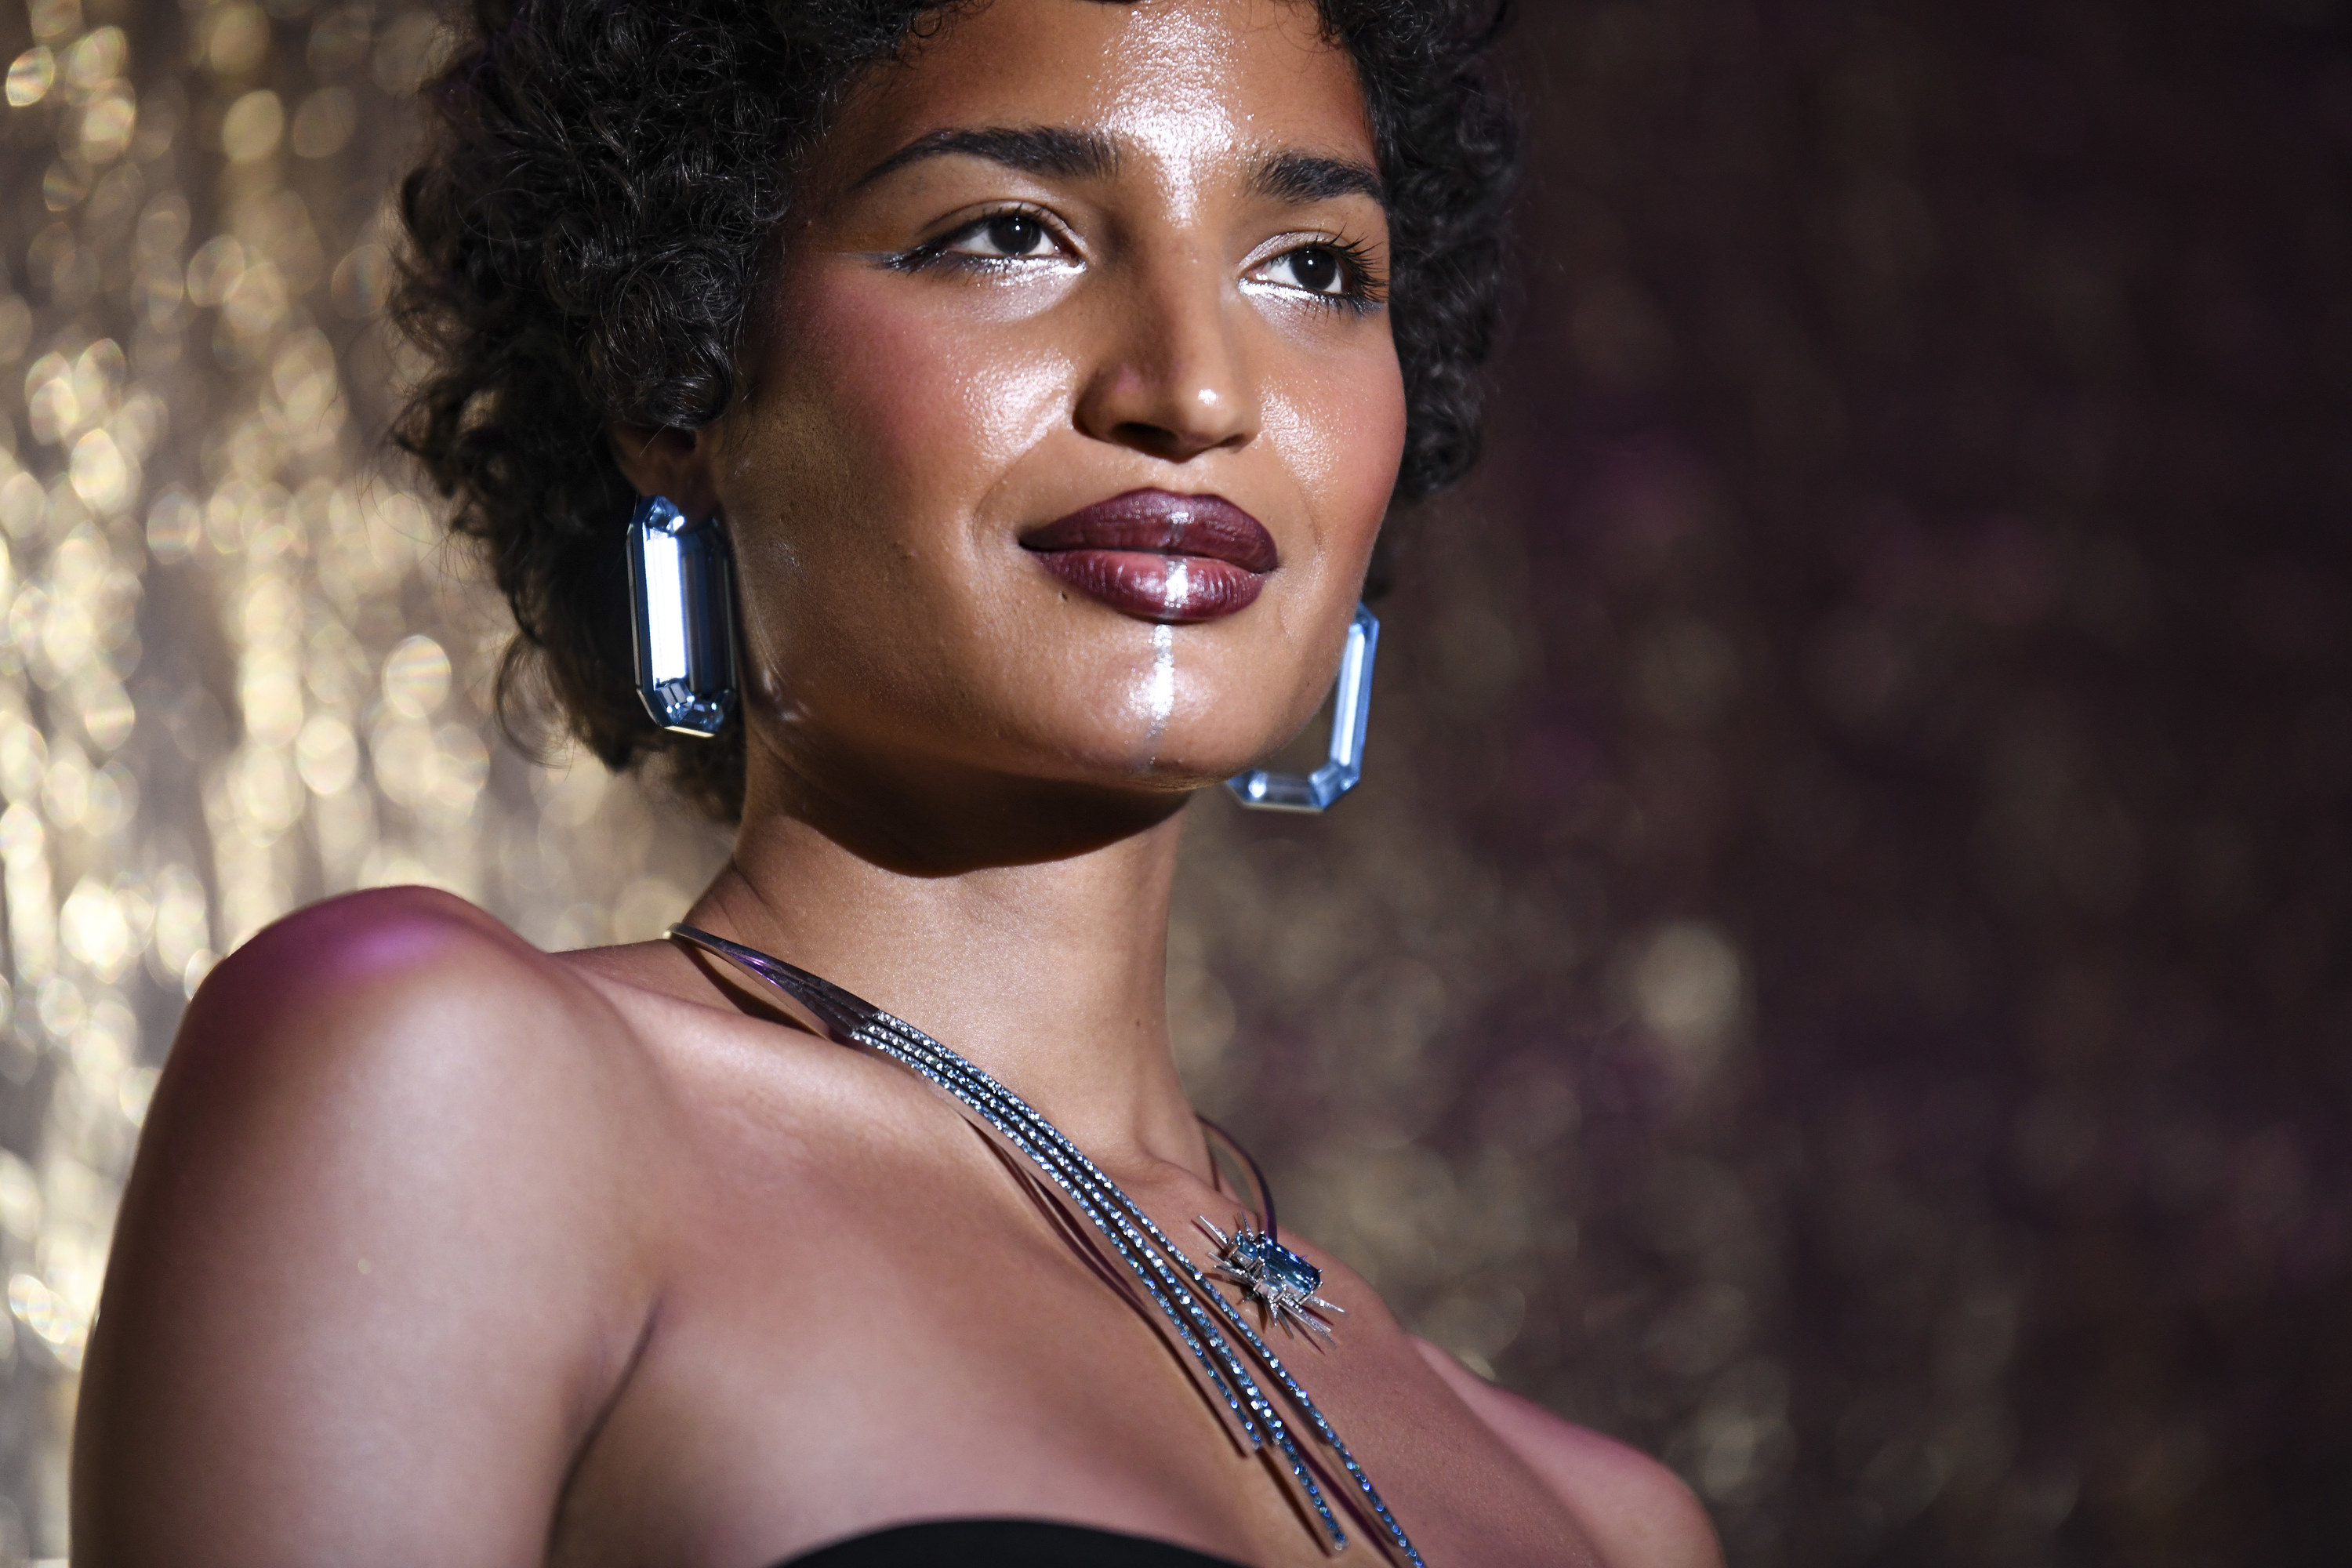 Indya Moore wears a FTX Diamond Necklace for auction during the amfAR Cannes Gala 2022